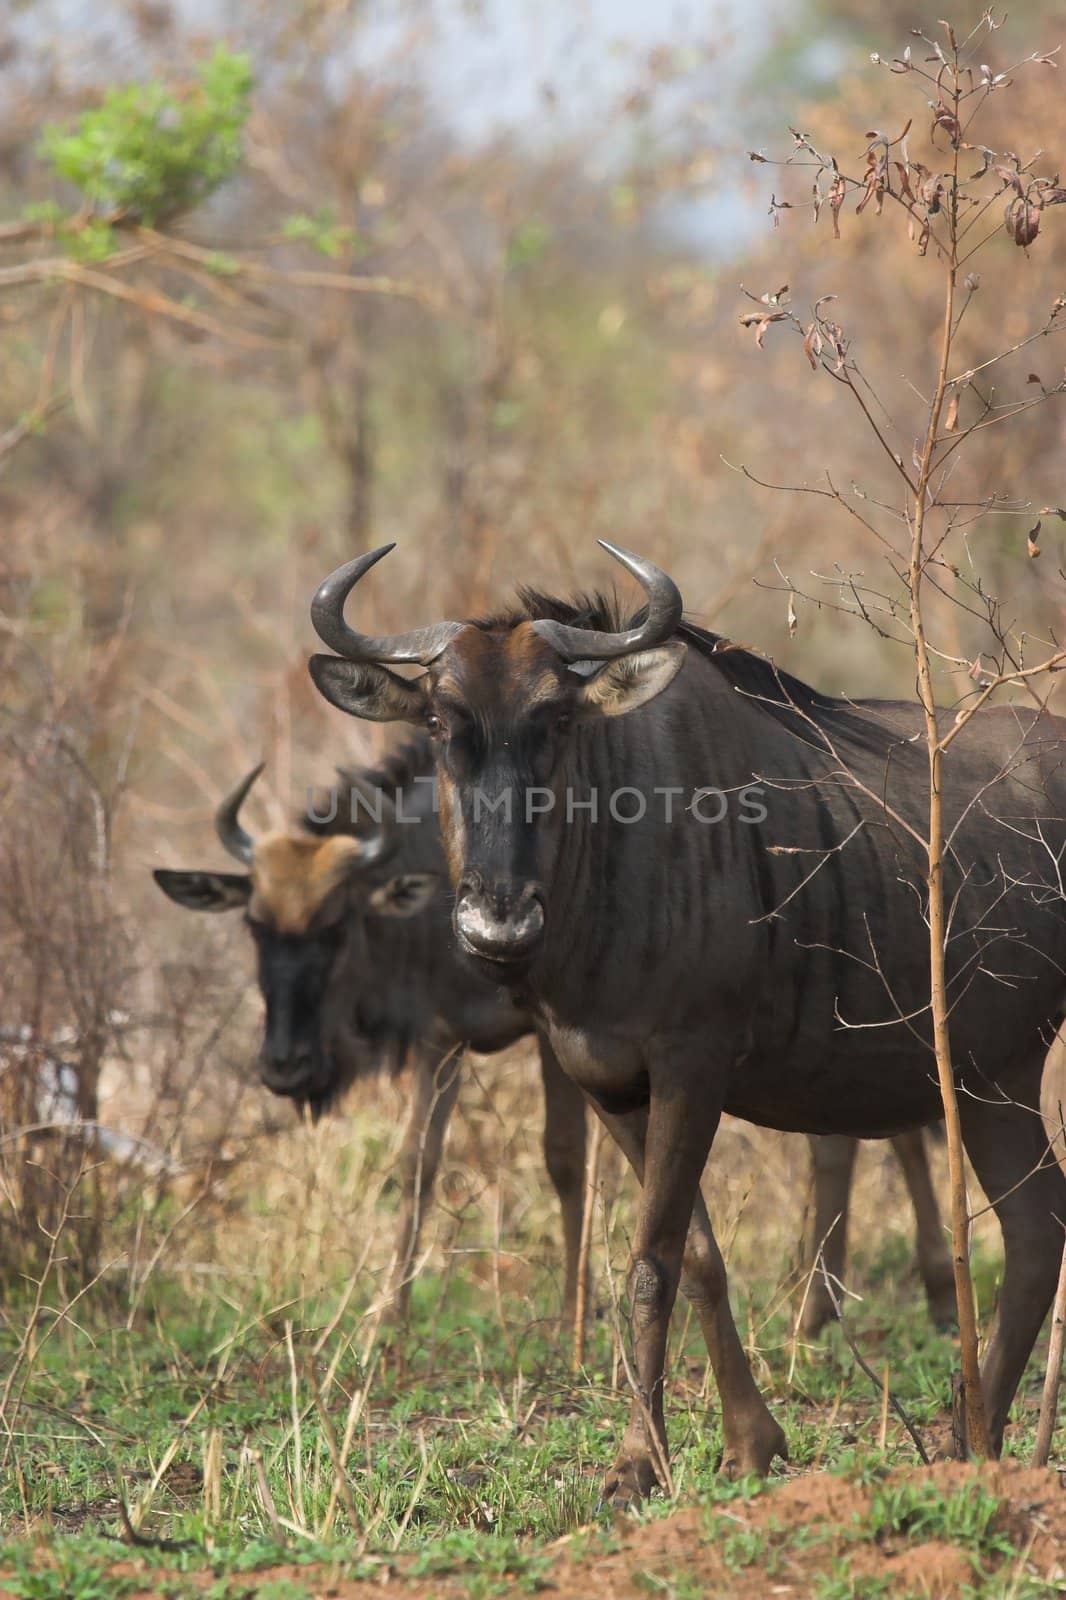 Blue wildebeest looking directly towards the camera